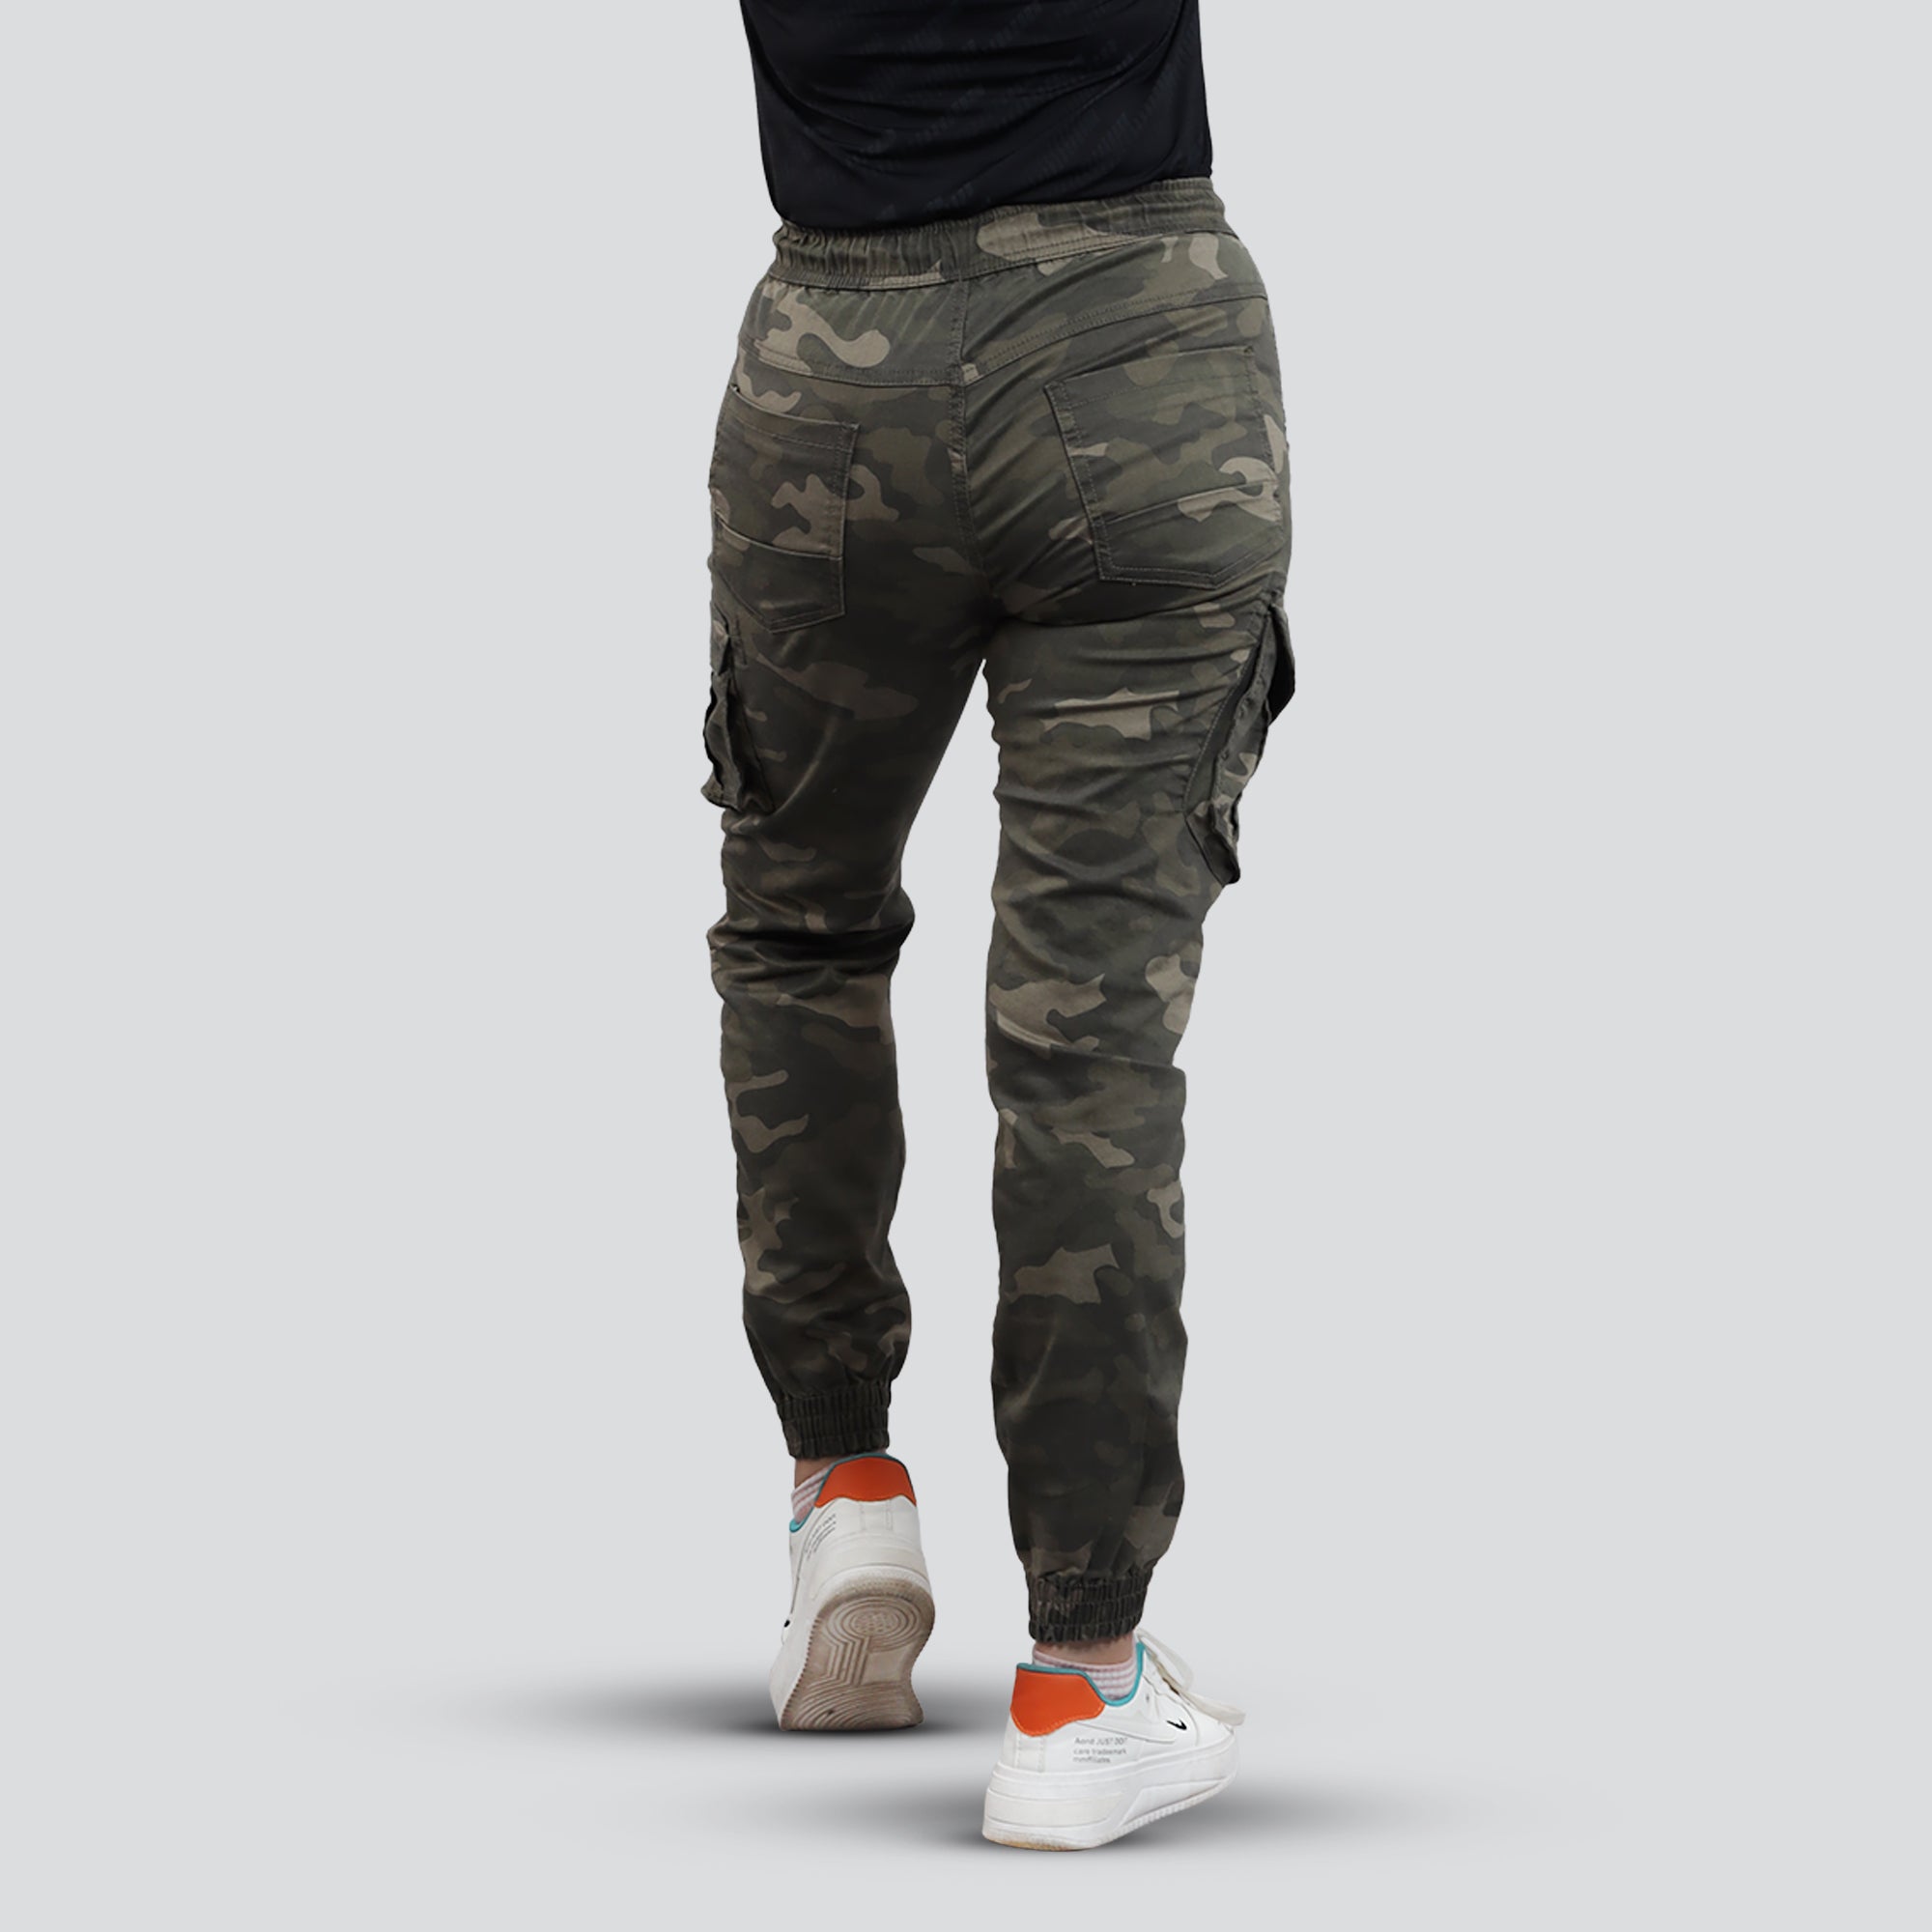 Women's Camo Cargo Pants With 6 pockets